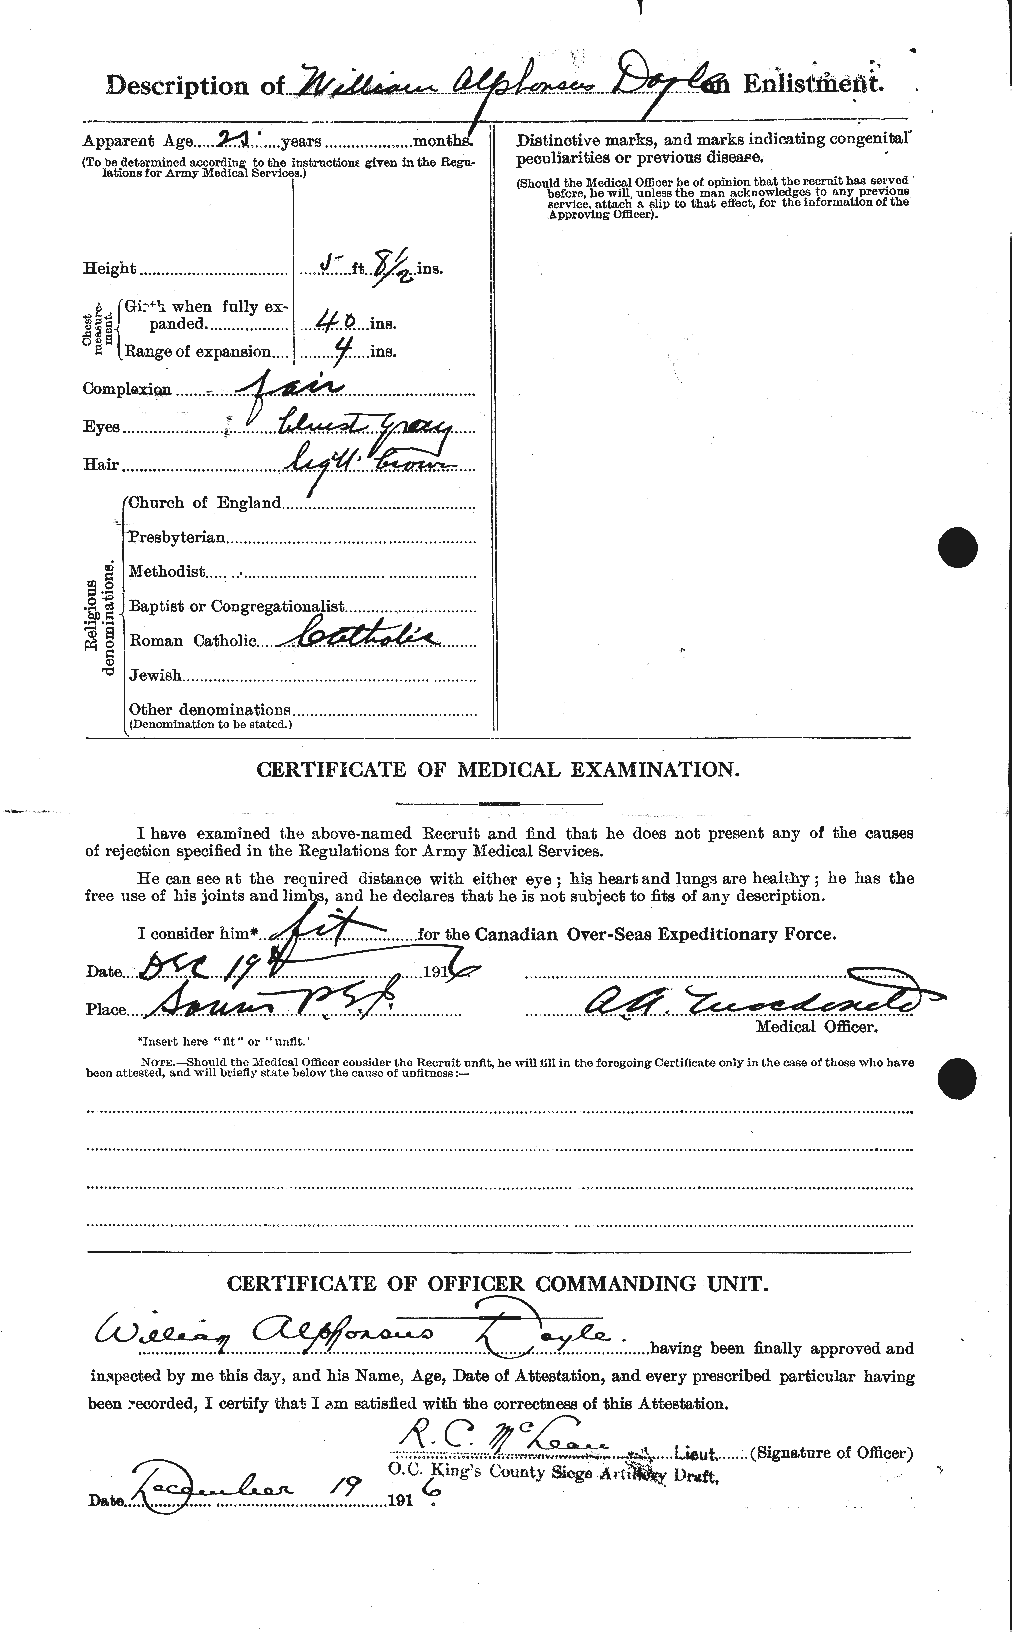 Personnel Records of the First World War - CEF 297950b